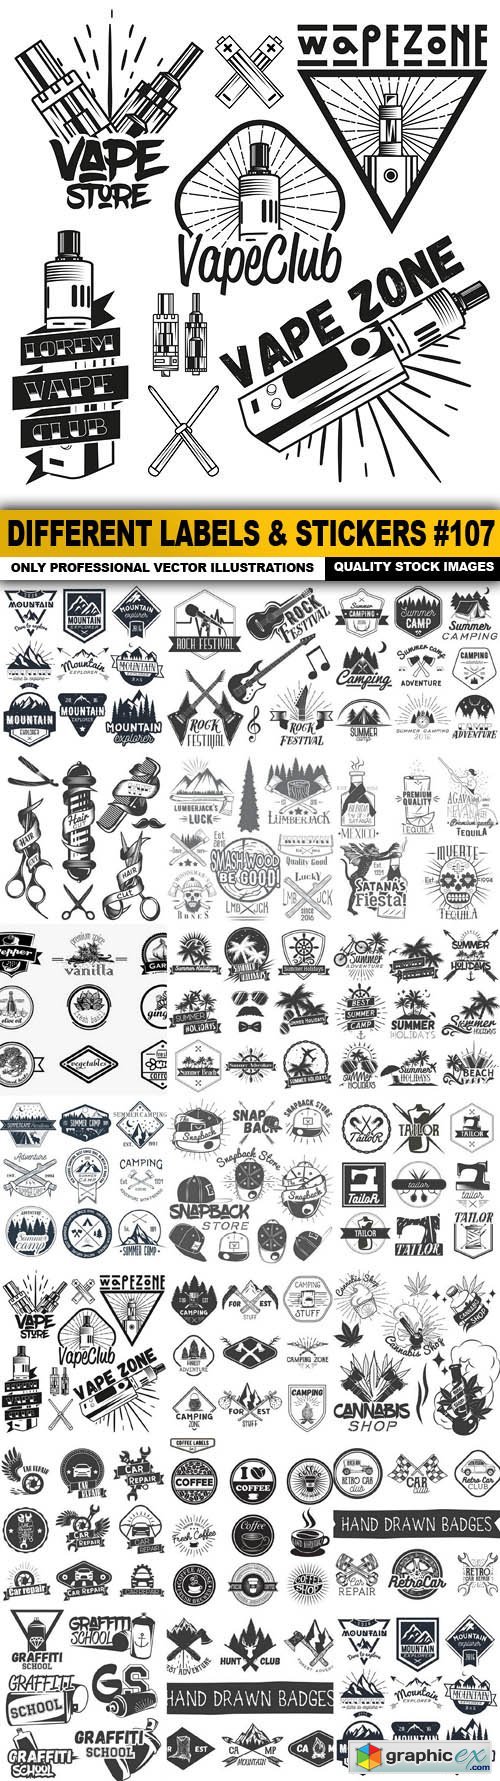 Different Labels & Stickers #107 - 20 Vector